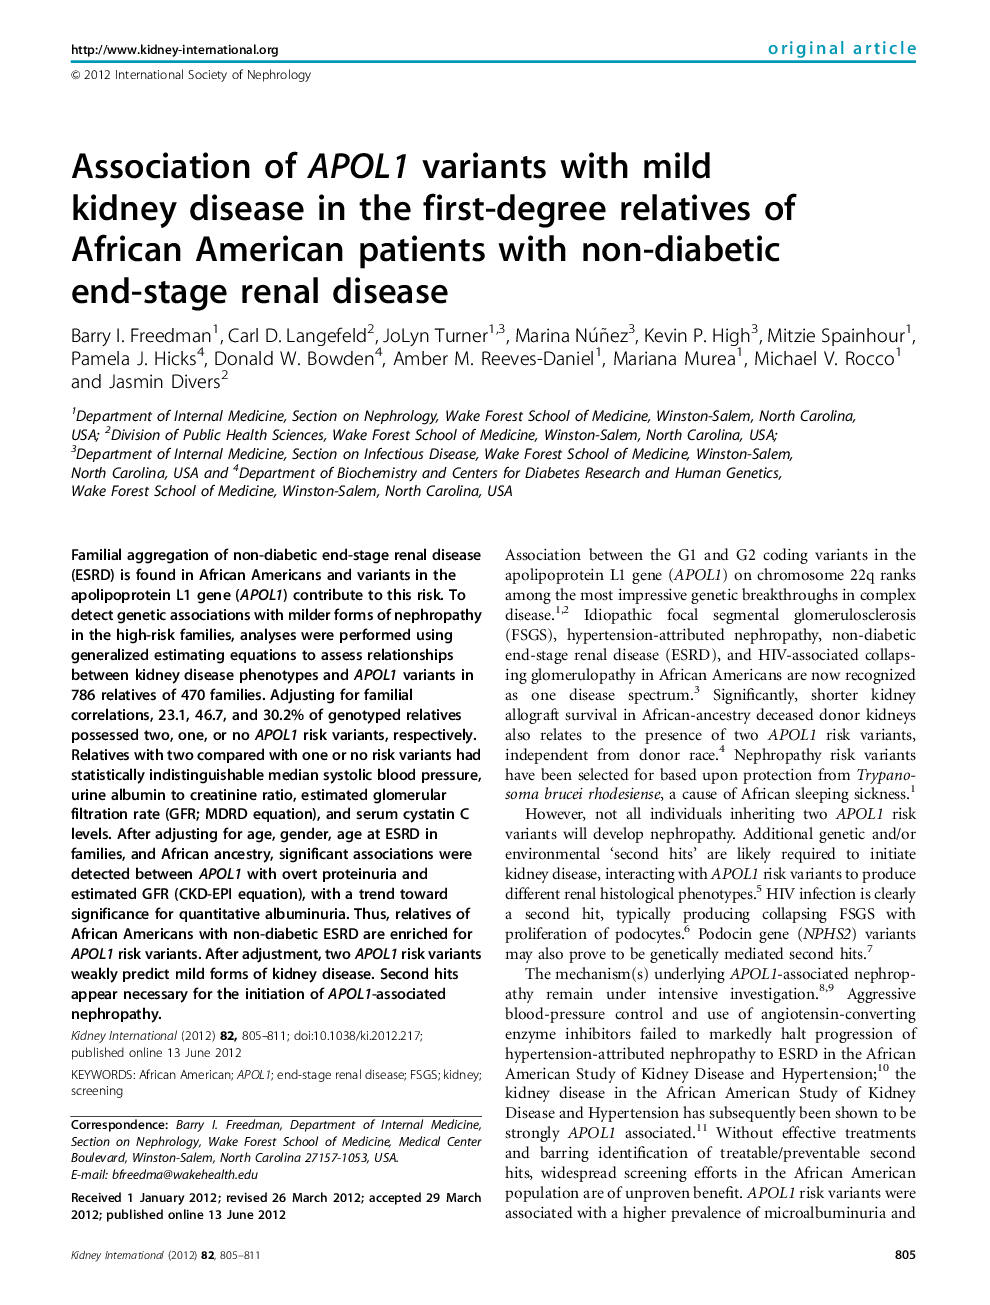 Association of APOL1 variants with mild kidney disease in the first-degree relatives of African American patients with non-diabetic end-stage renal disease 